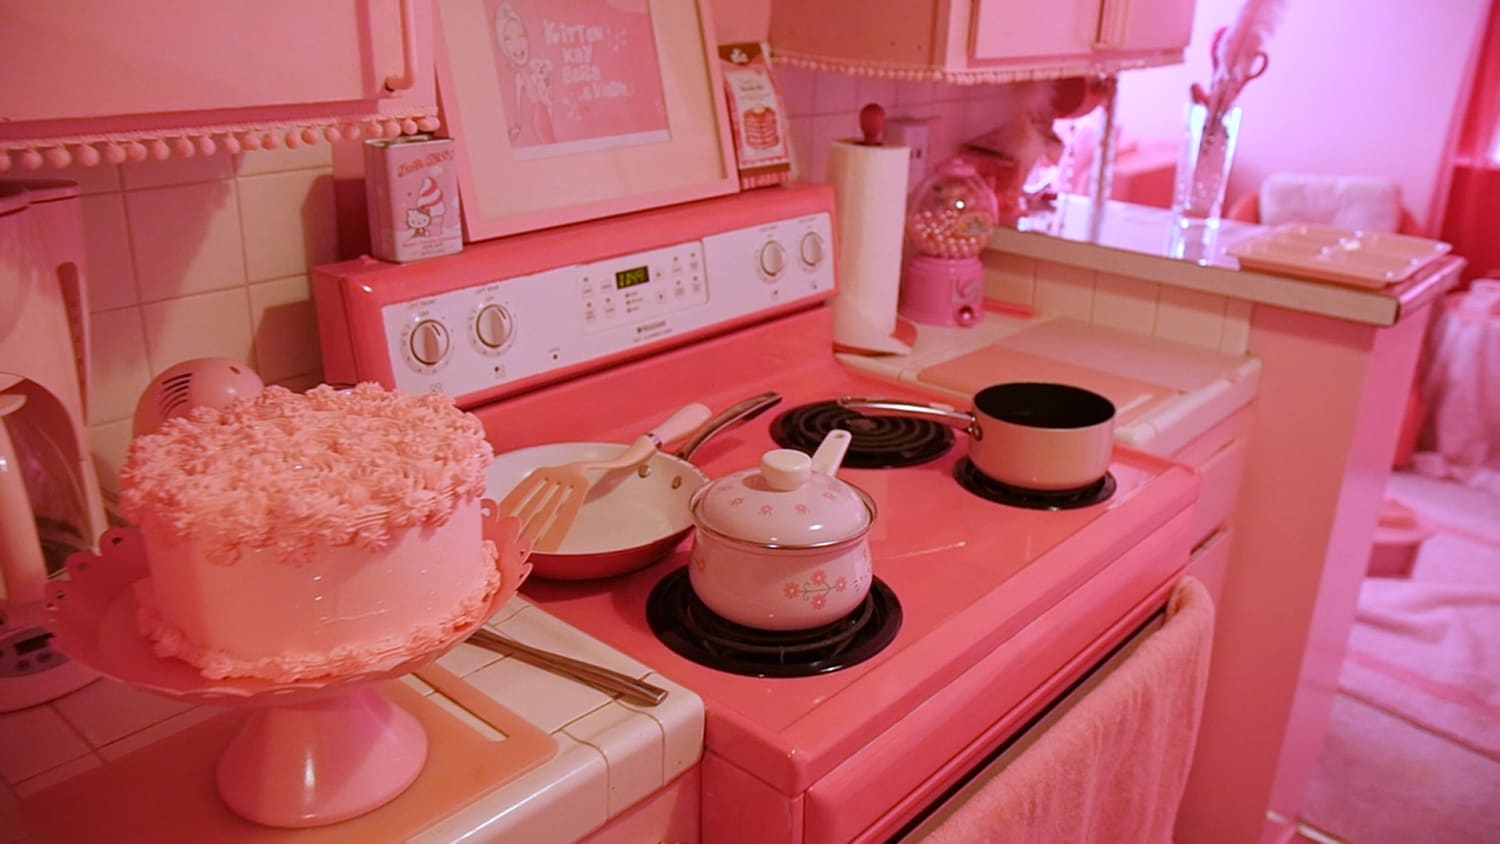 Seriously, Who Has a Pink Kitchen? - The Accidental Locavore